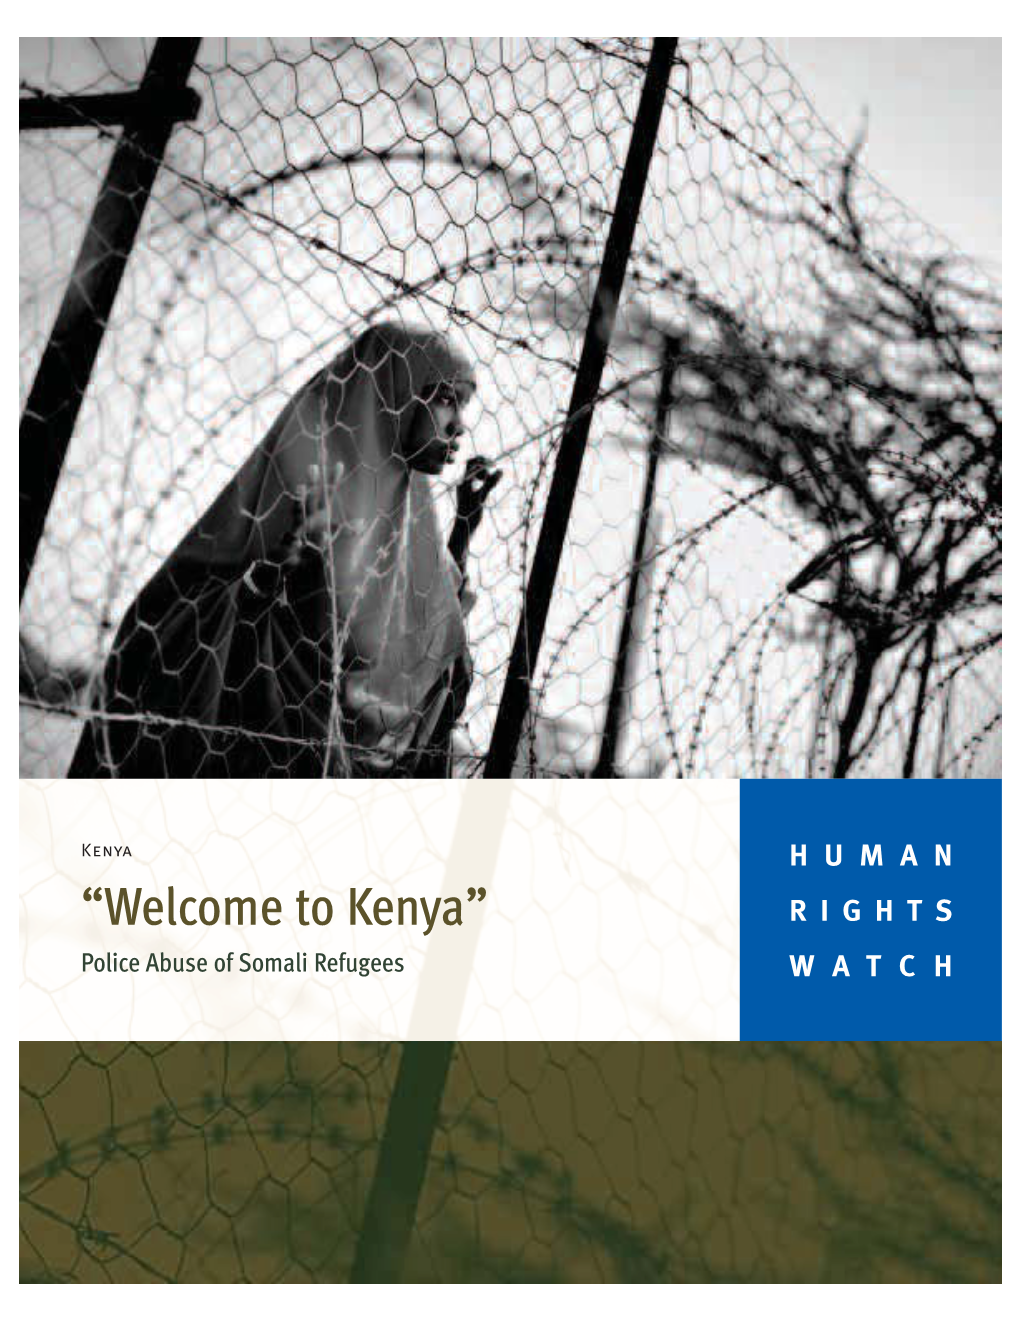 Kenya” RIGHTS Police Abuse of Somali Refugees WATCH